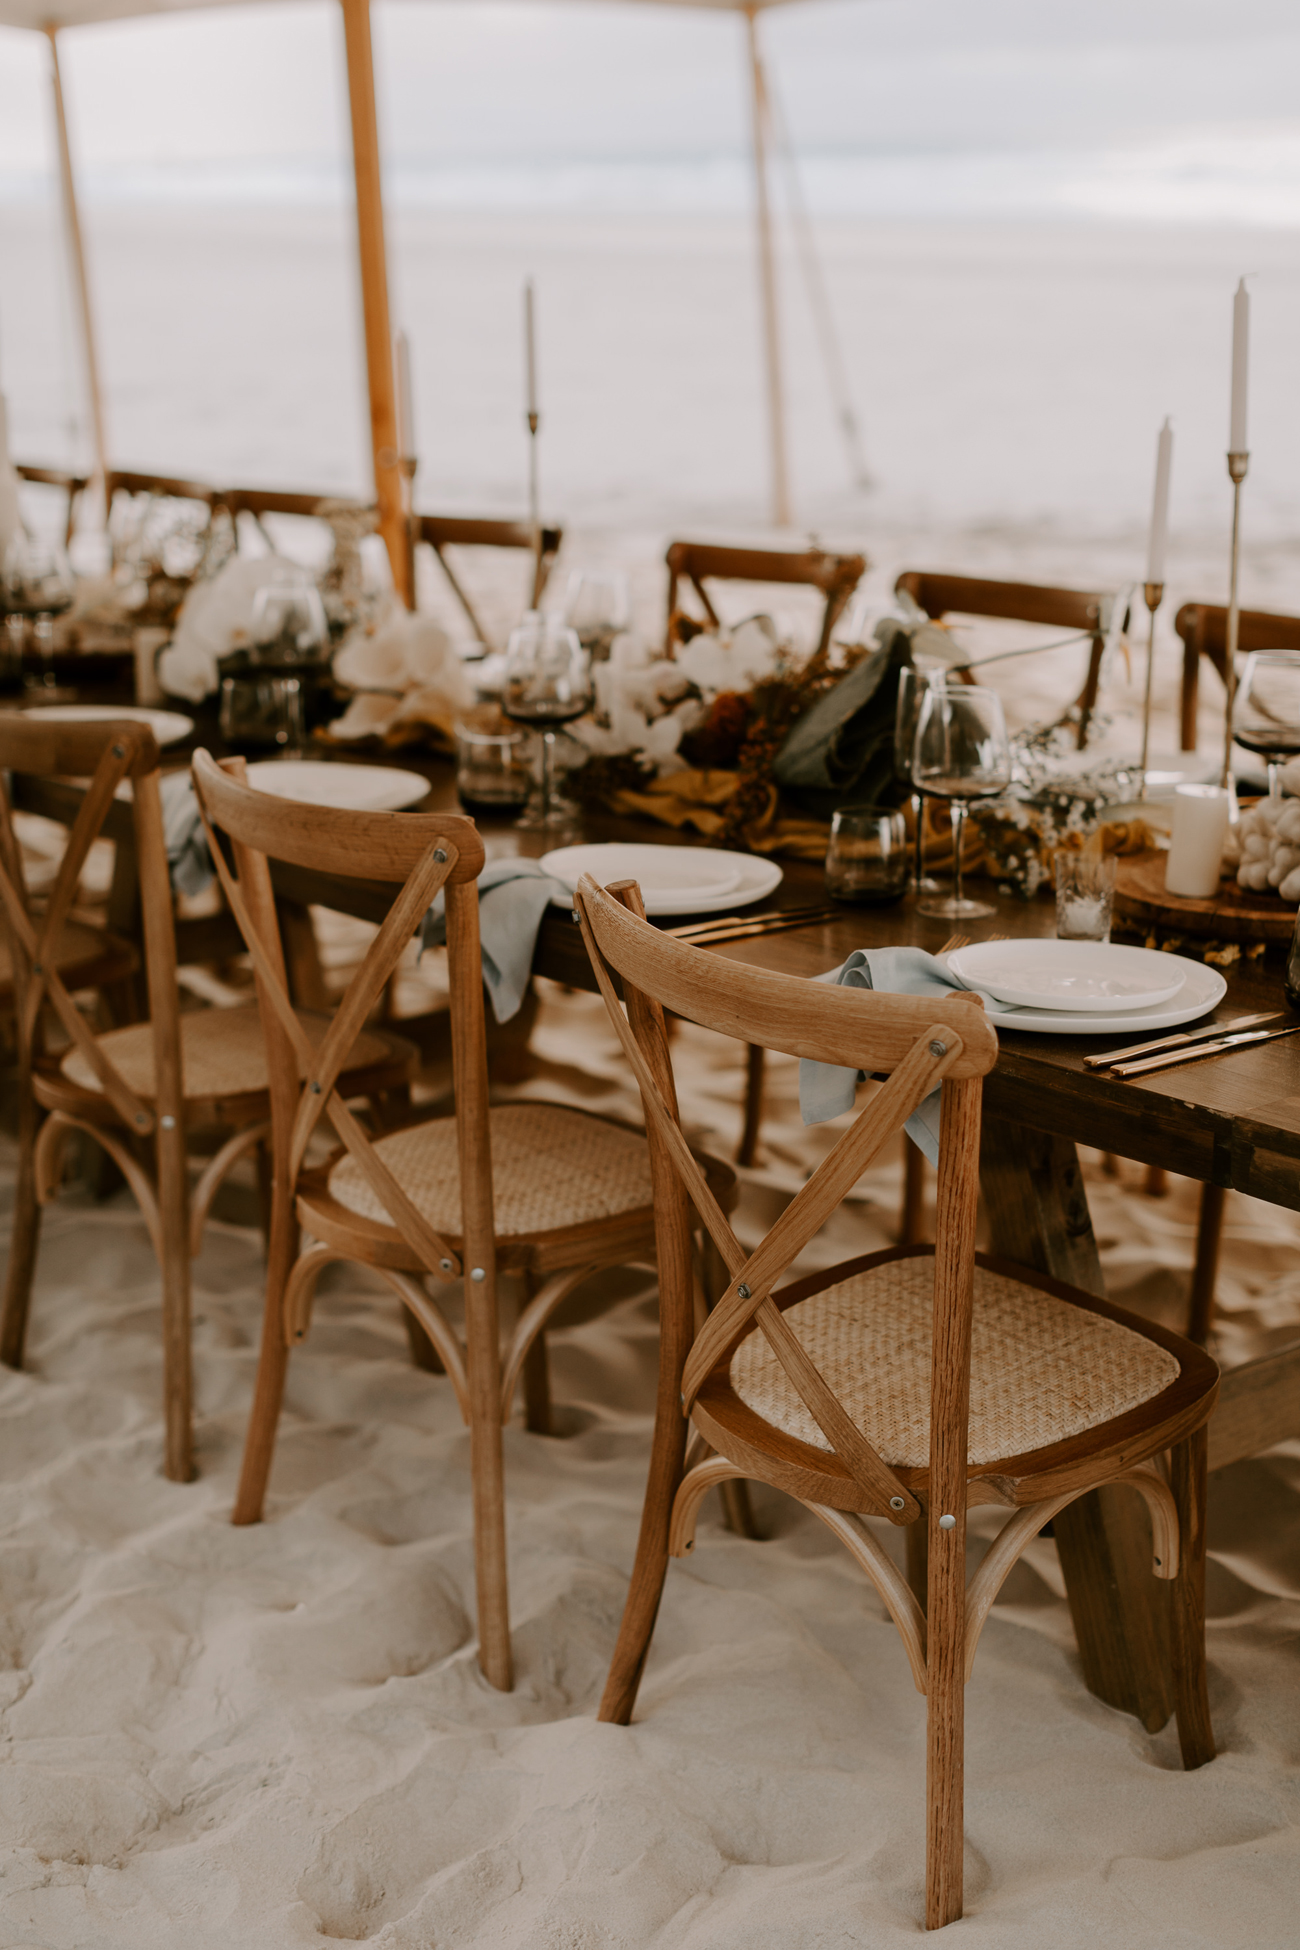 The Oceanic Edit - GC Hitched // Styled by The Events Lounge, Gold Coast Wedding Planner